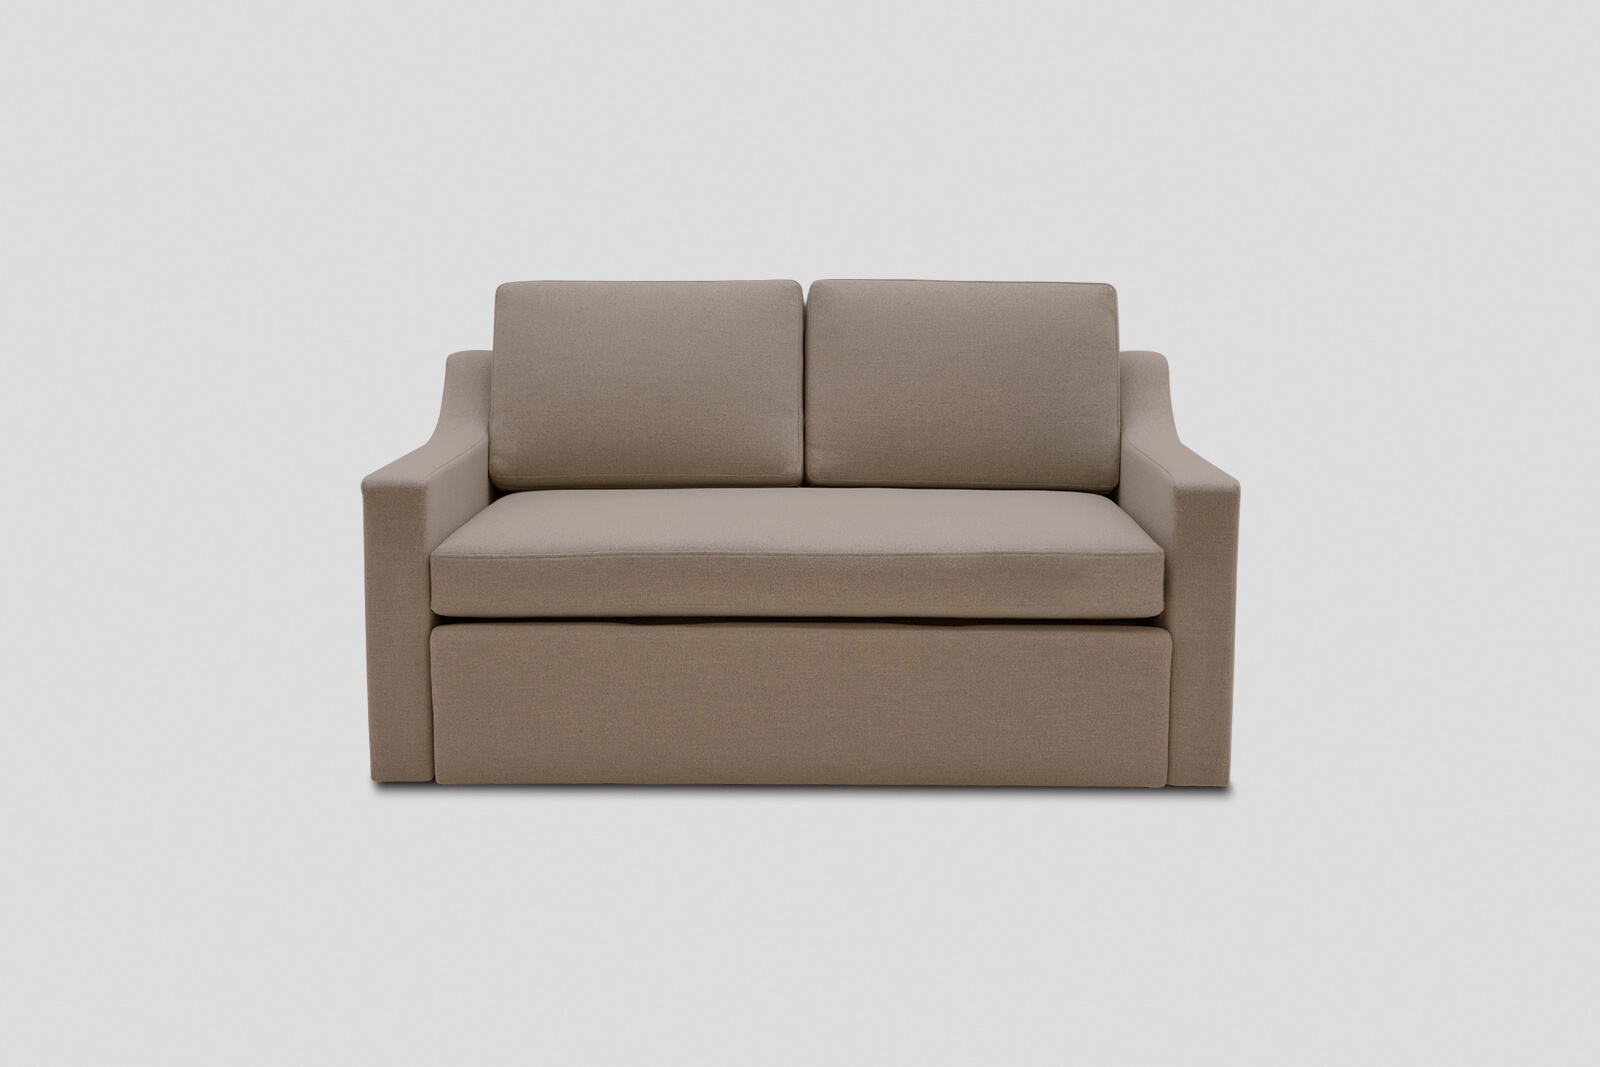 HBSB02-double-sofa-bed-husk-double-front